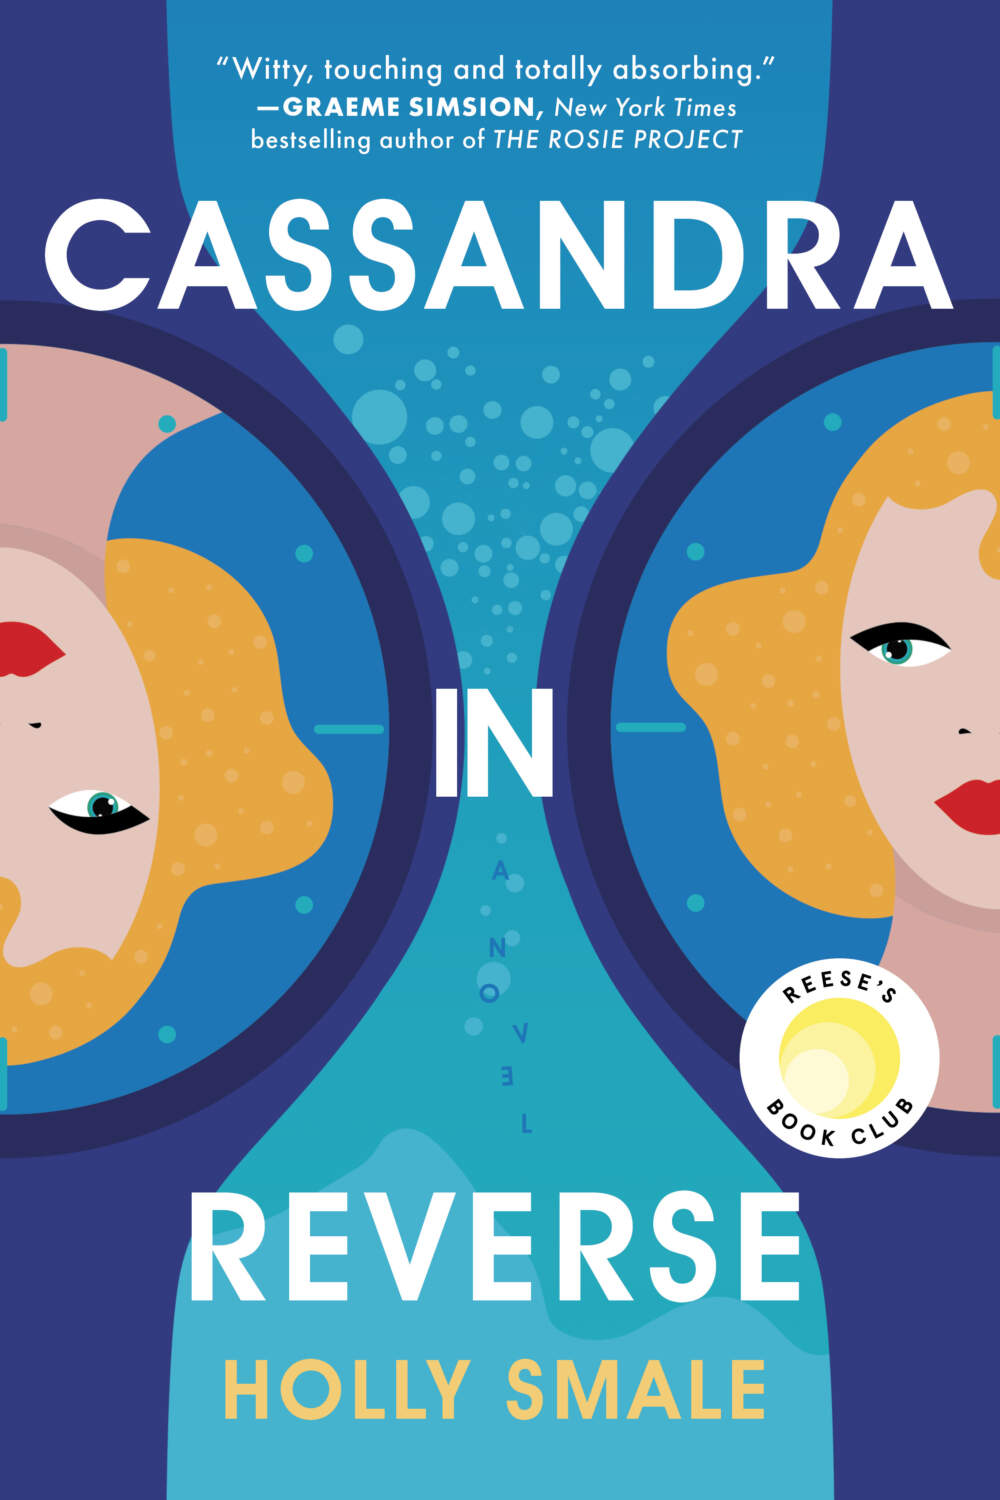 The cover of "Cassandra in Reverse." (Courtesy)